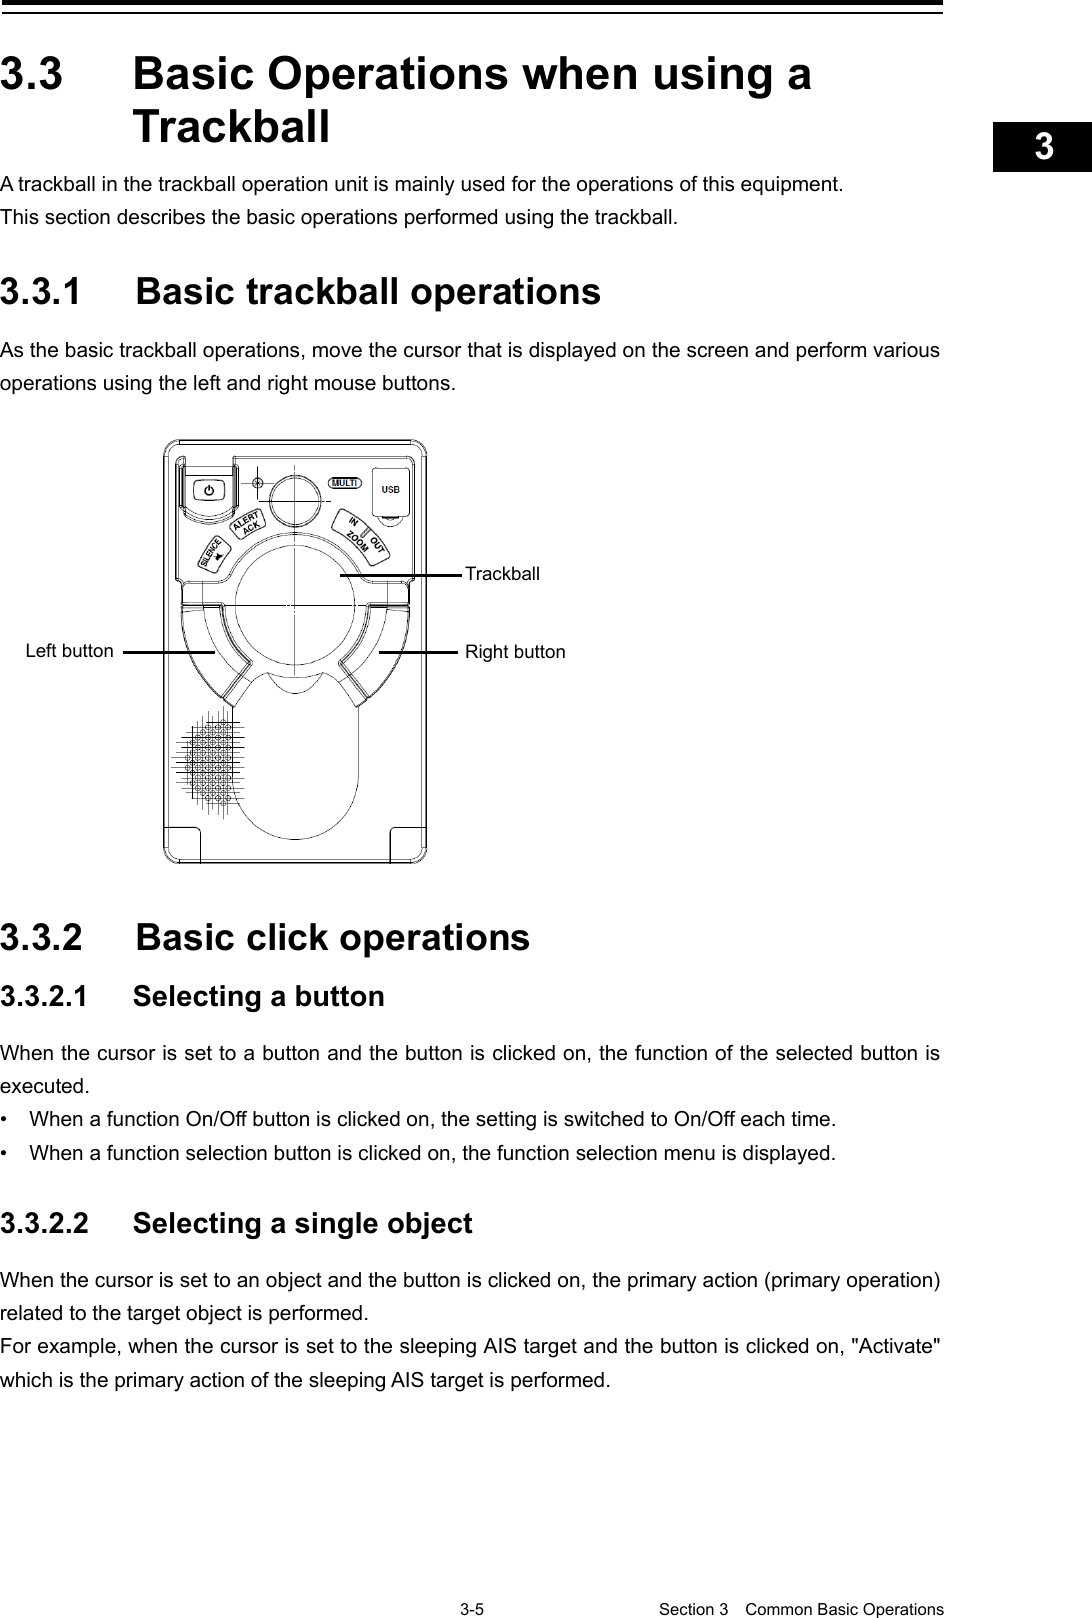    3-5  Section 3  Common Basic Operations    1  2  3  4  5  6  7  8  9  10  11  12  13  14  15  16  17  18  19  20  21  22  23  24  25  APP A   APP B  1    3.3  Basic Operations when using a Trackball A trackball in the trackball operation unit is mainly used for the operations of this equipment.   This section describes the basic operations performed using the trackball.  3.3.1 Basic trackball operations As the basic trackball operations, move the cursor that is displayed on the screen and perform various operations using the left and right mouse buttons.    3.3.2 Basic click operations 3.3.2.1 Selecting a button When the cursor is set to a button and the button is clicked on, the function of the selected button is executed. • When a function On/Off button is clicked on, the setting is switched to On/Off each time. • When a function selection button is clicked on, the function selection menu is displayed.  3.3.2.2 Selecting a single object When the cursor is set to an object and the button is clicked on, the primary action (primary operation) related to the target object is performed. For example, when the cursor is set to the sleeping AIS target and the button is clicked on, &quot;Activate&quot; which is the primary action of the sleeping AIS target is performed.    Right button Left button Trackball 